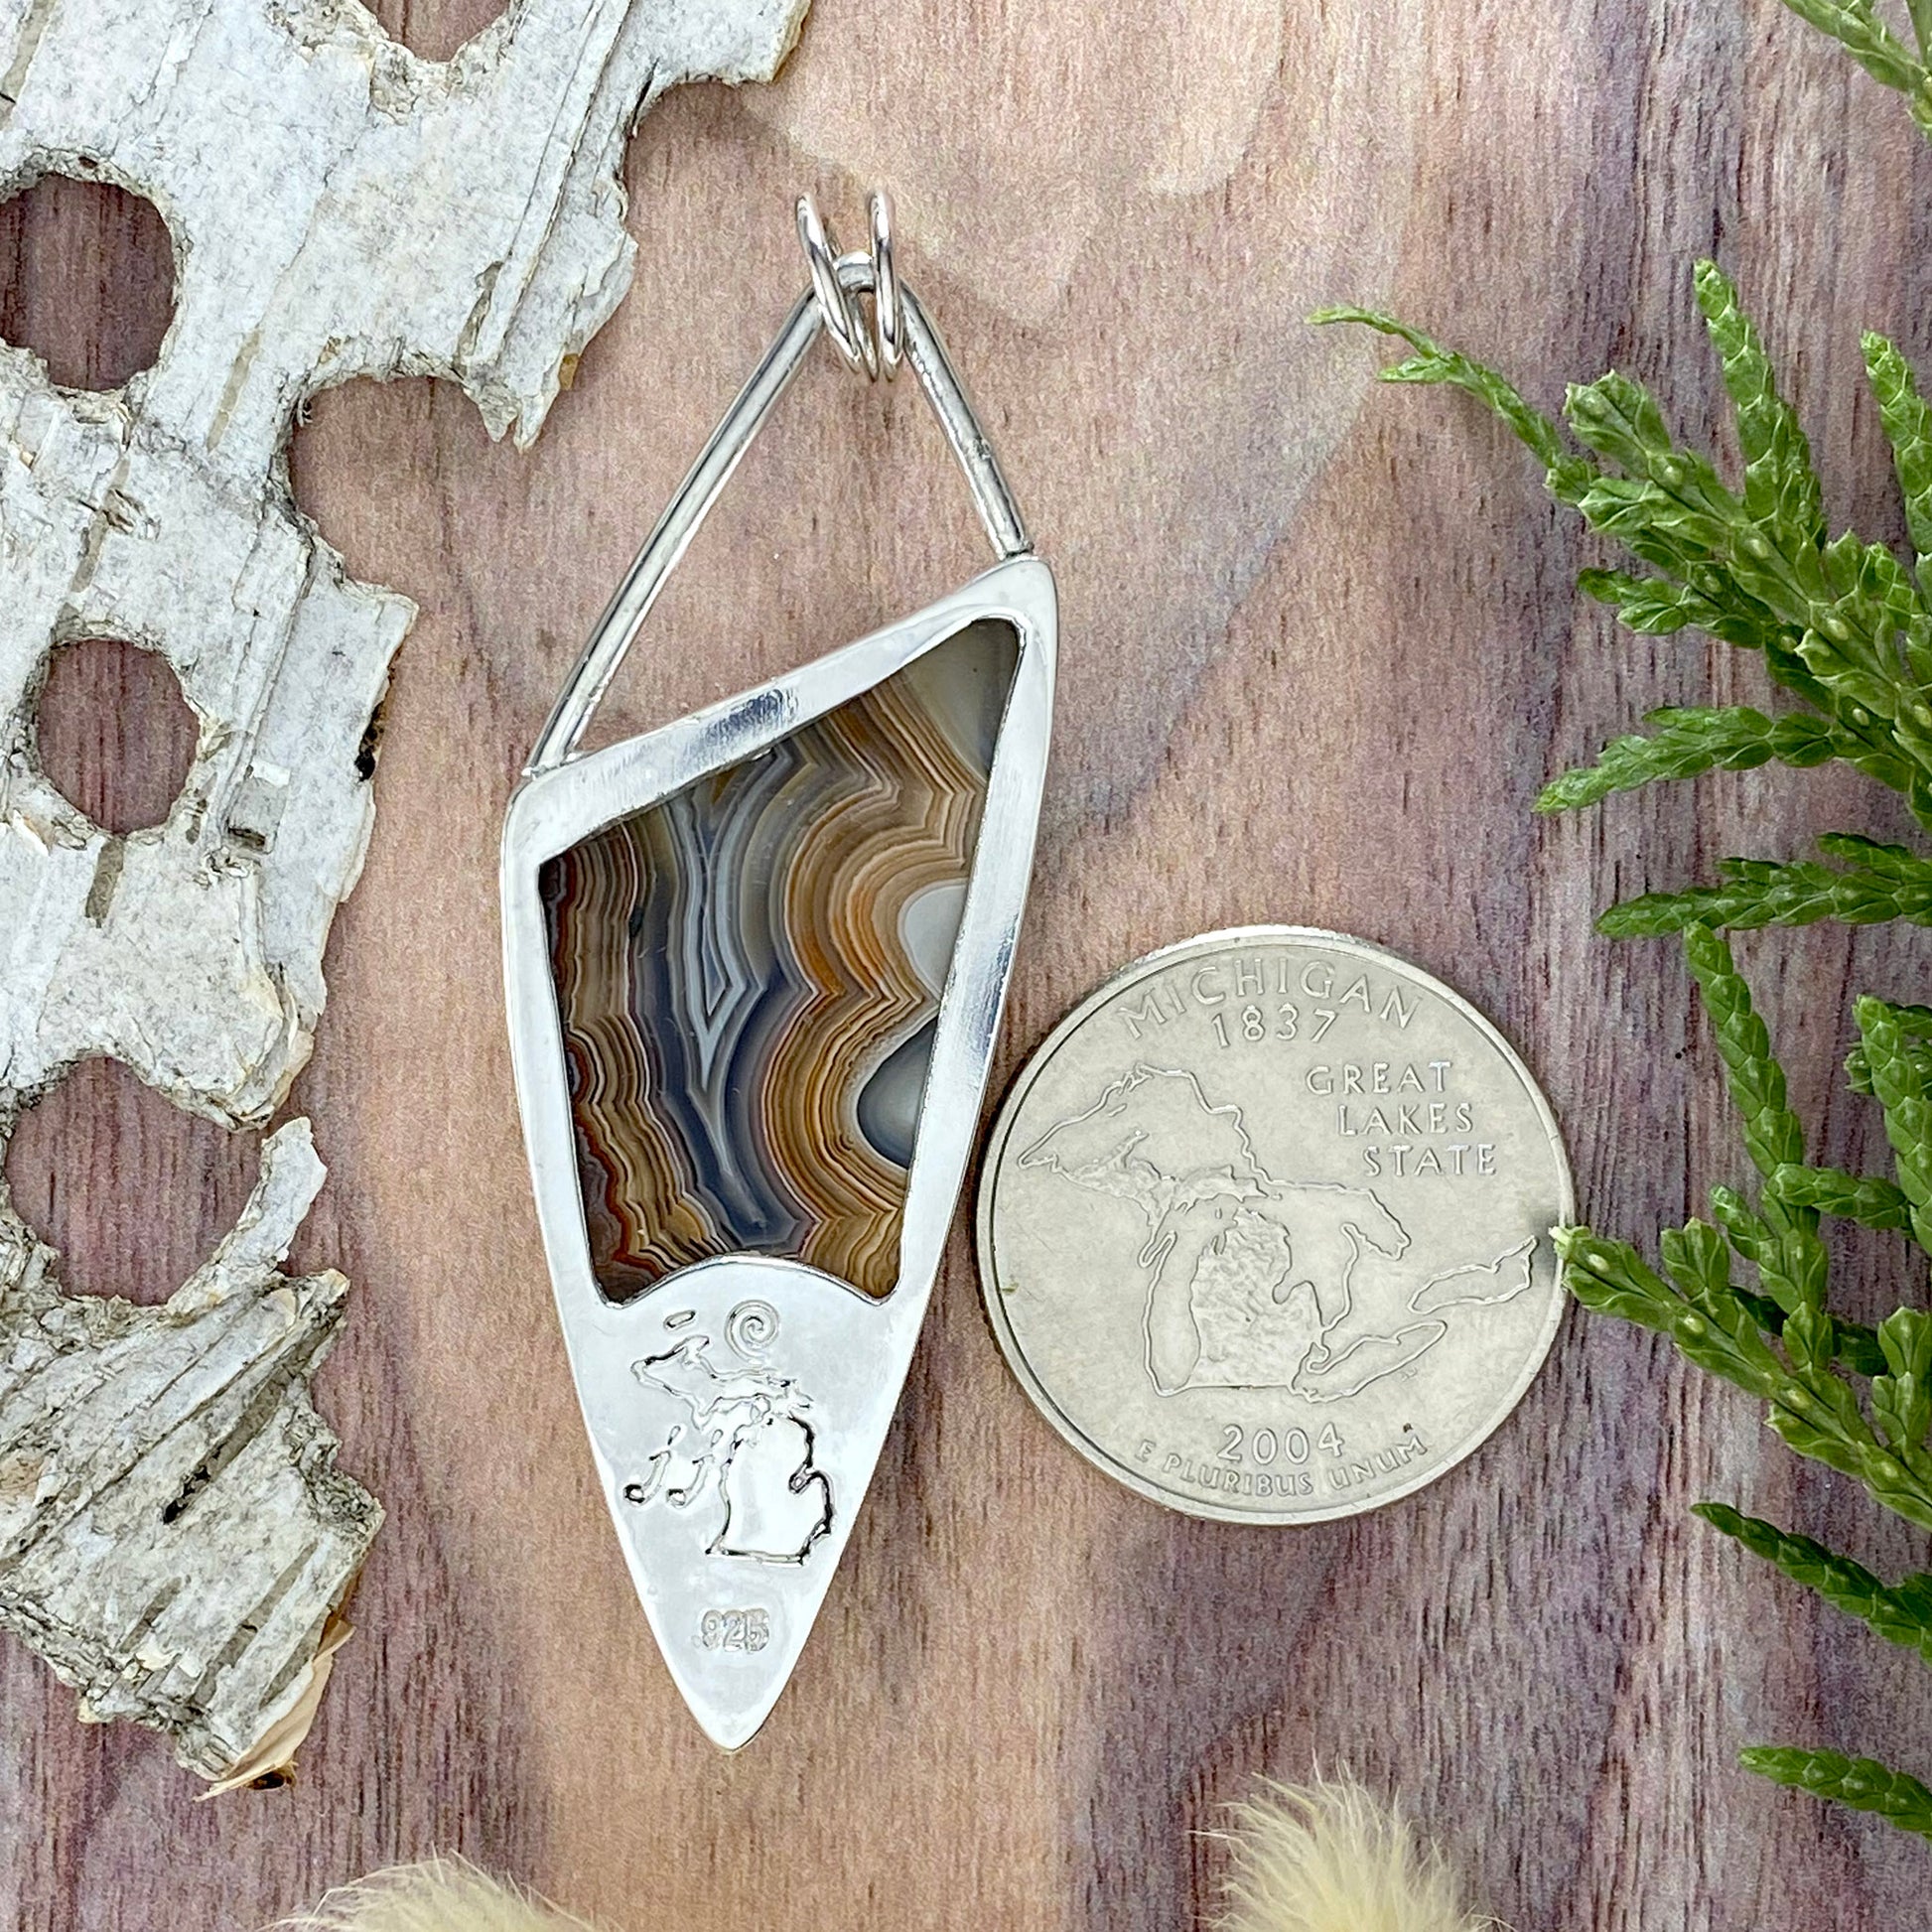 Laguna Lace Agate Pendant Back View - Stone Treasures by the Lake